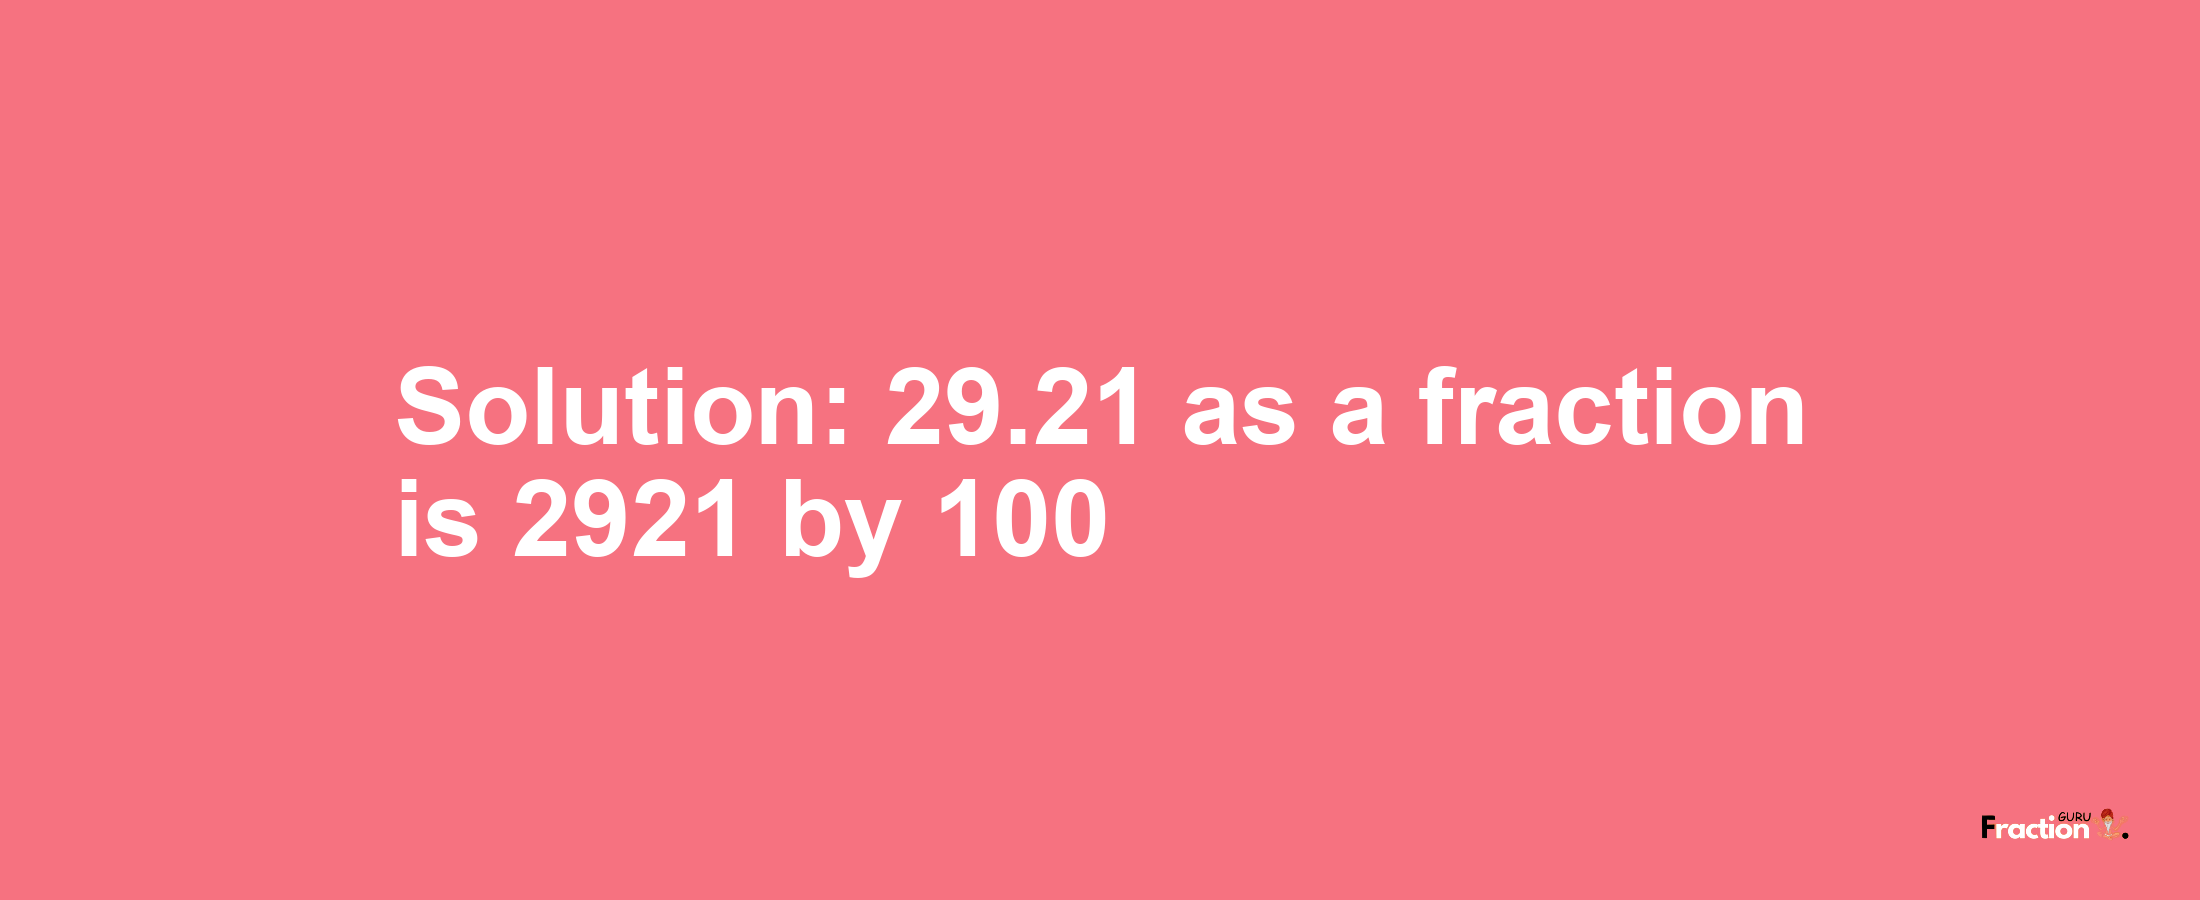 Solution:29.21 as a fraction is 2921/100